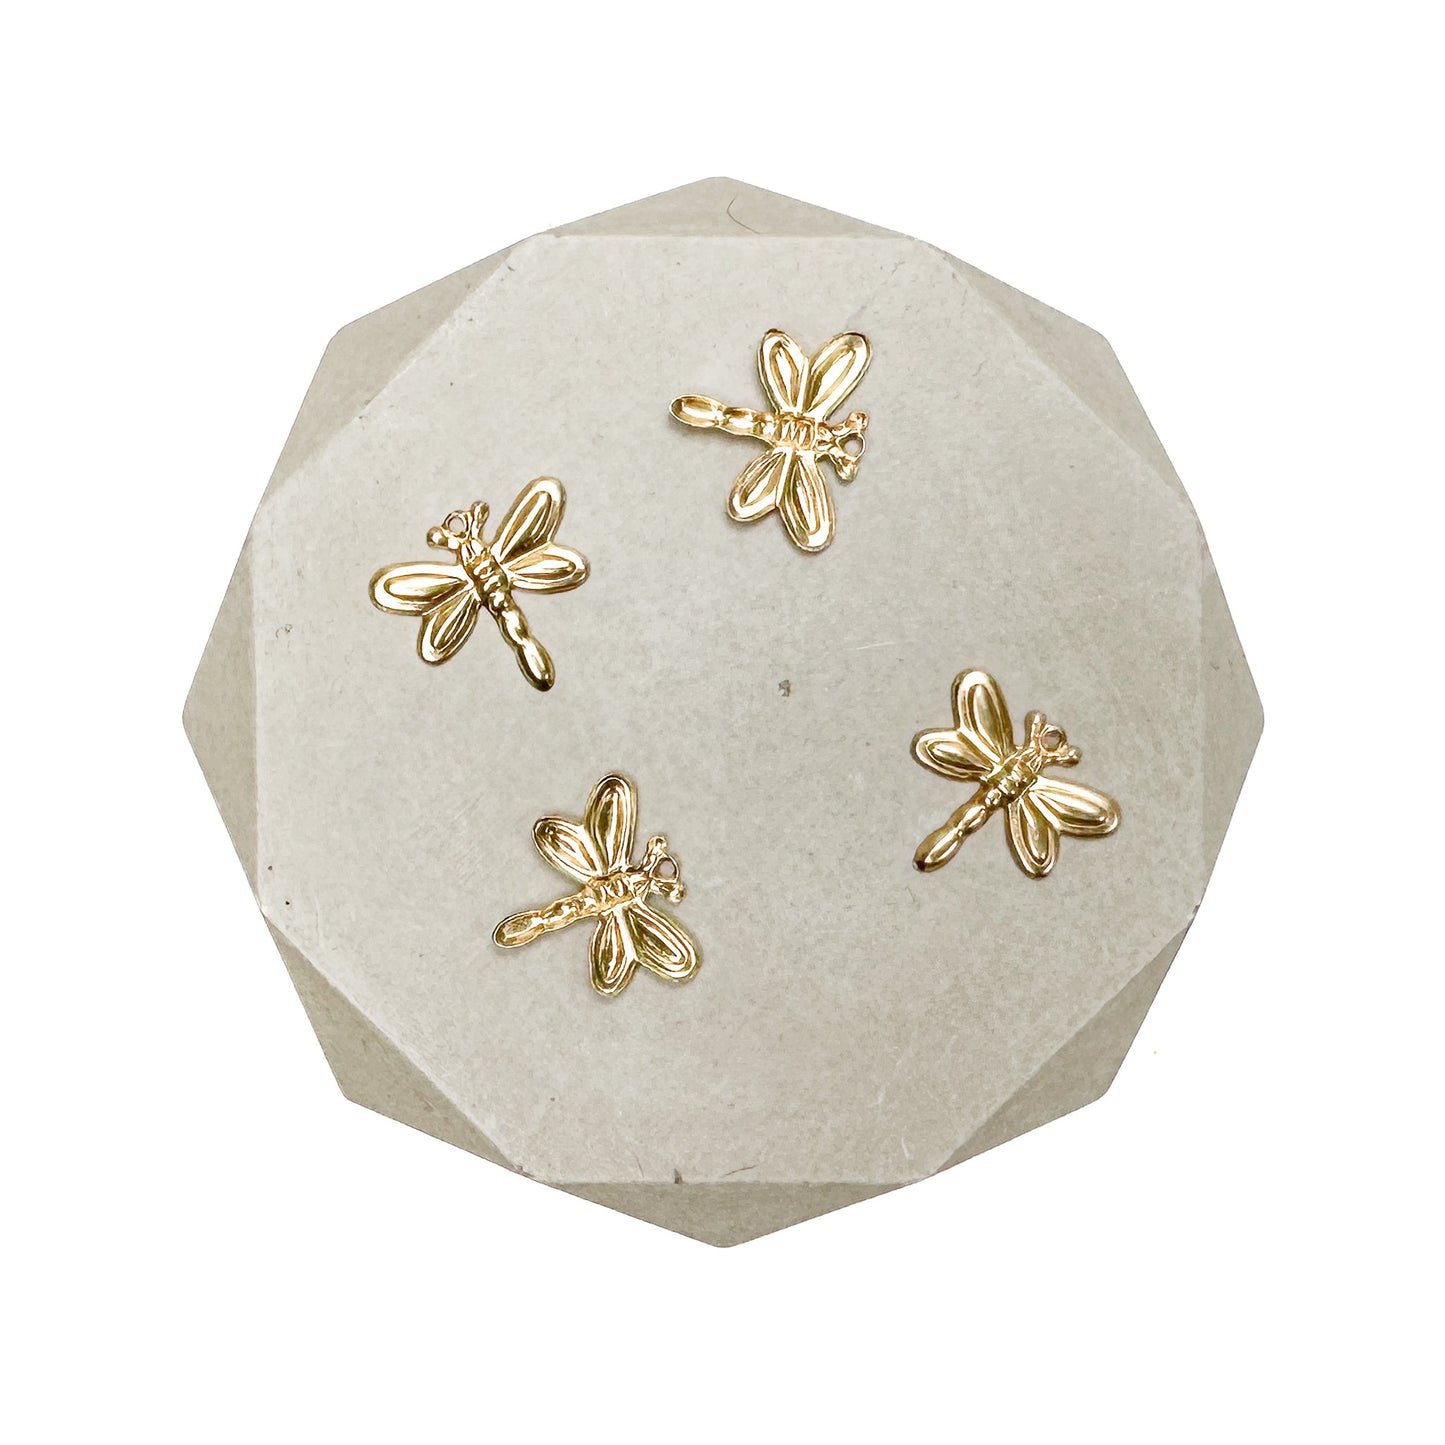 Dragonfly Charm (14k Gold Filled) - 1 pc.-The Bead Gallery Honolulu